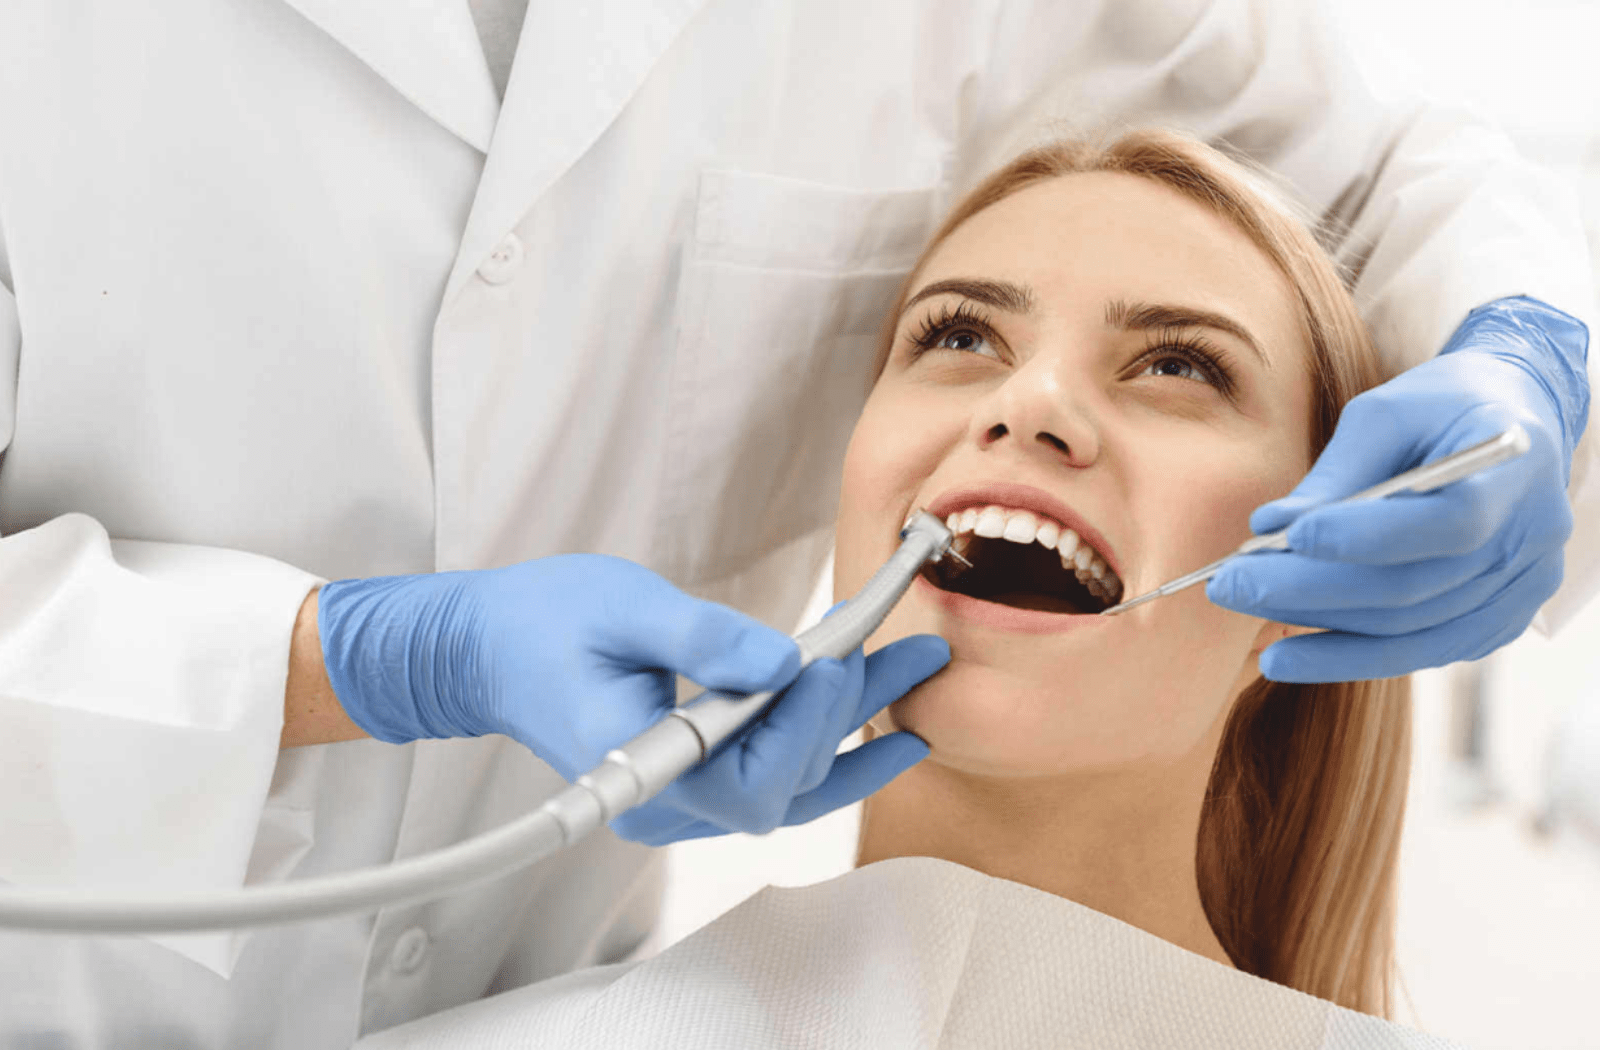 Teeth Cleaning and Airflow - Oral Heatlh Professionals